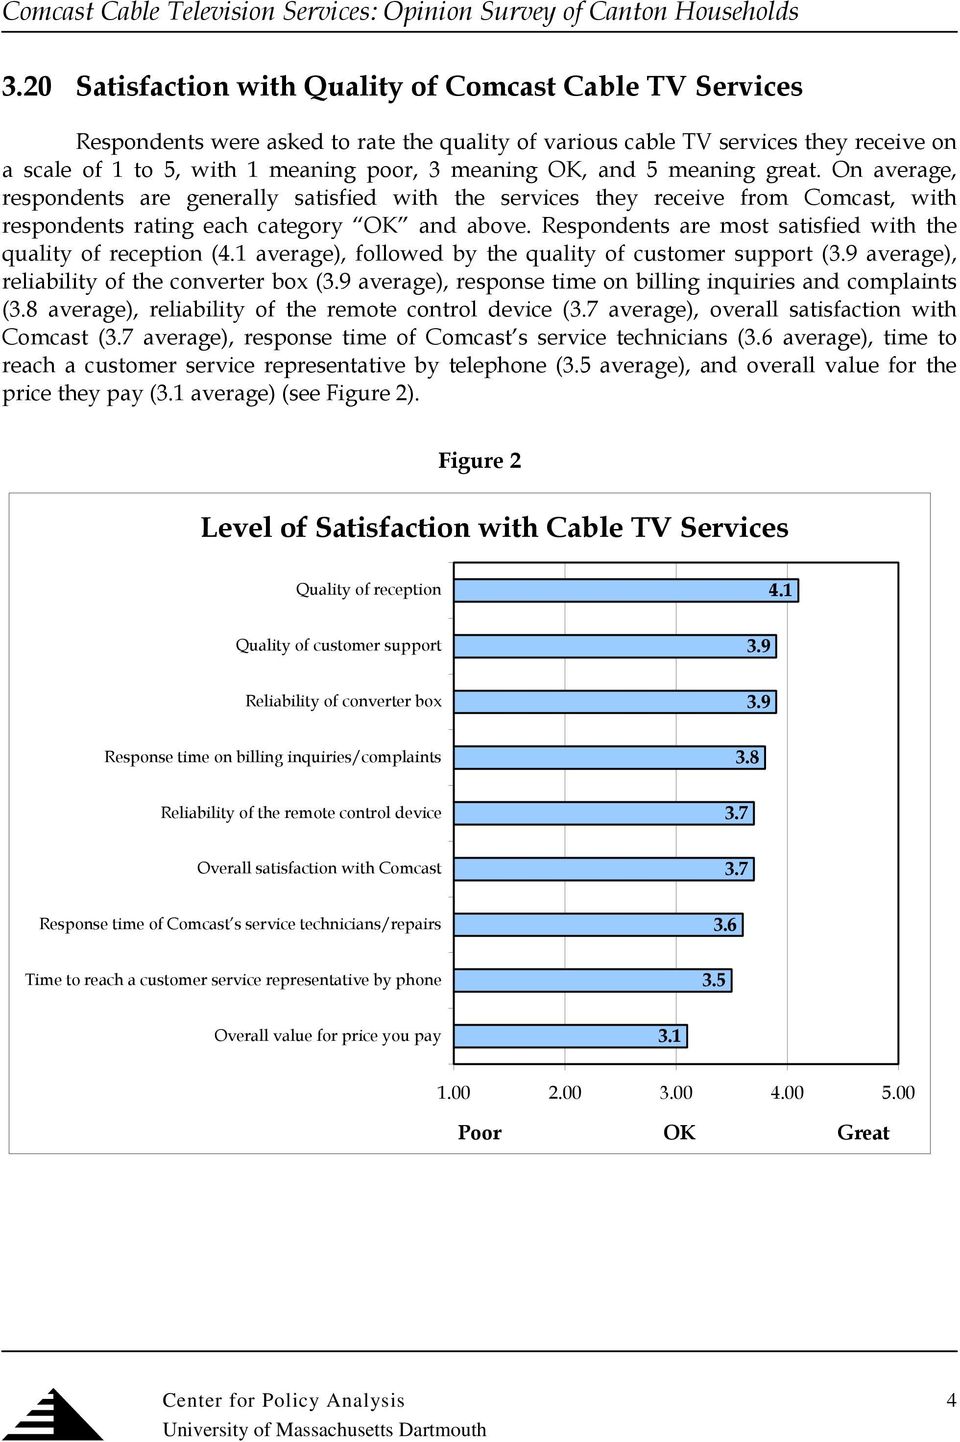 Respondents are most satisfied with the quality of reception (. average), followed by the quality of customer support (.9 average), reliability of the converter box (.